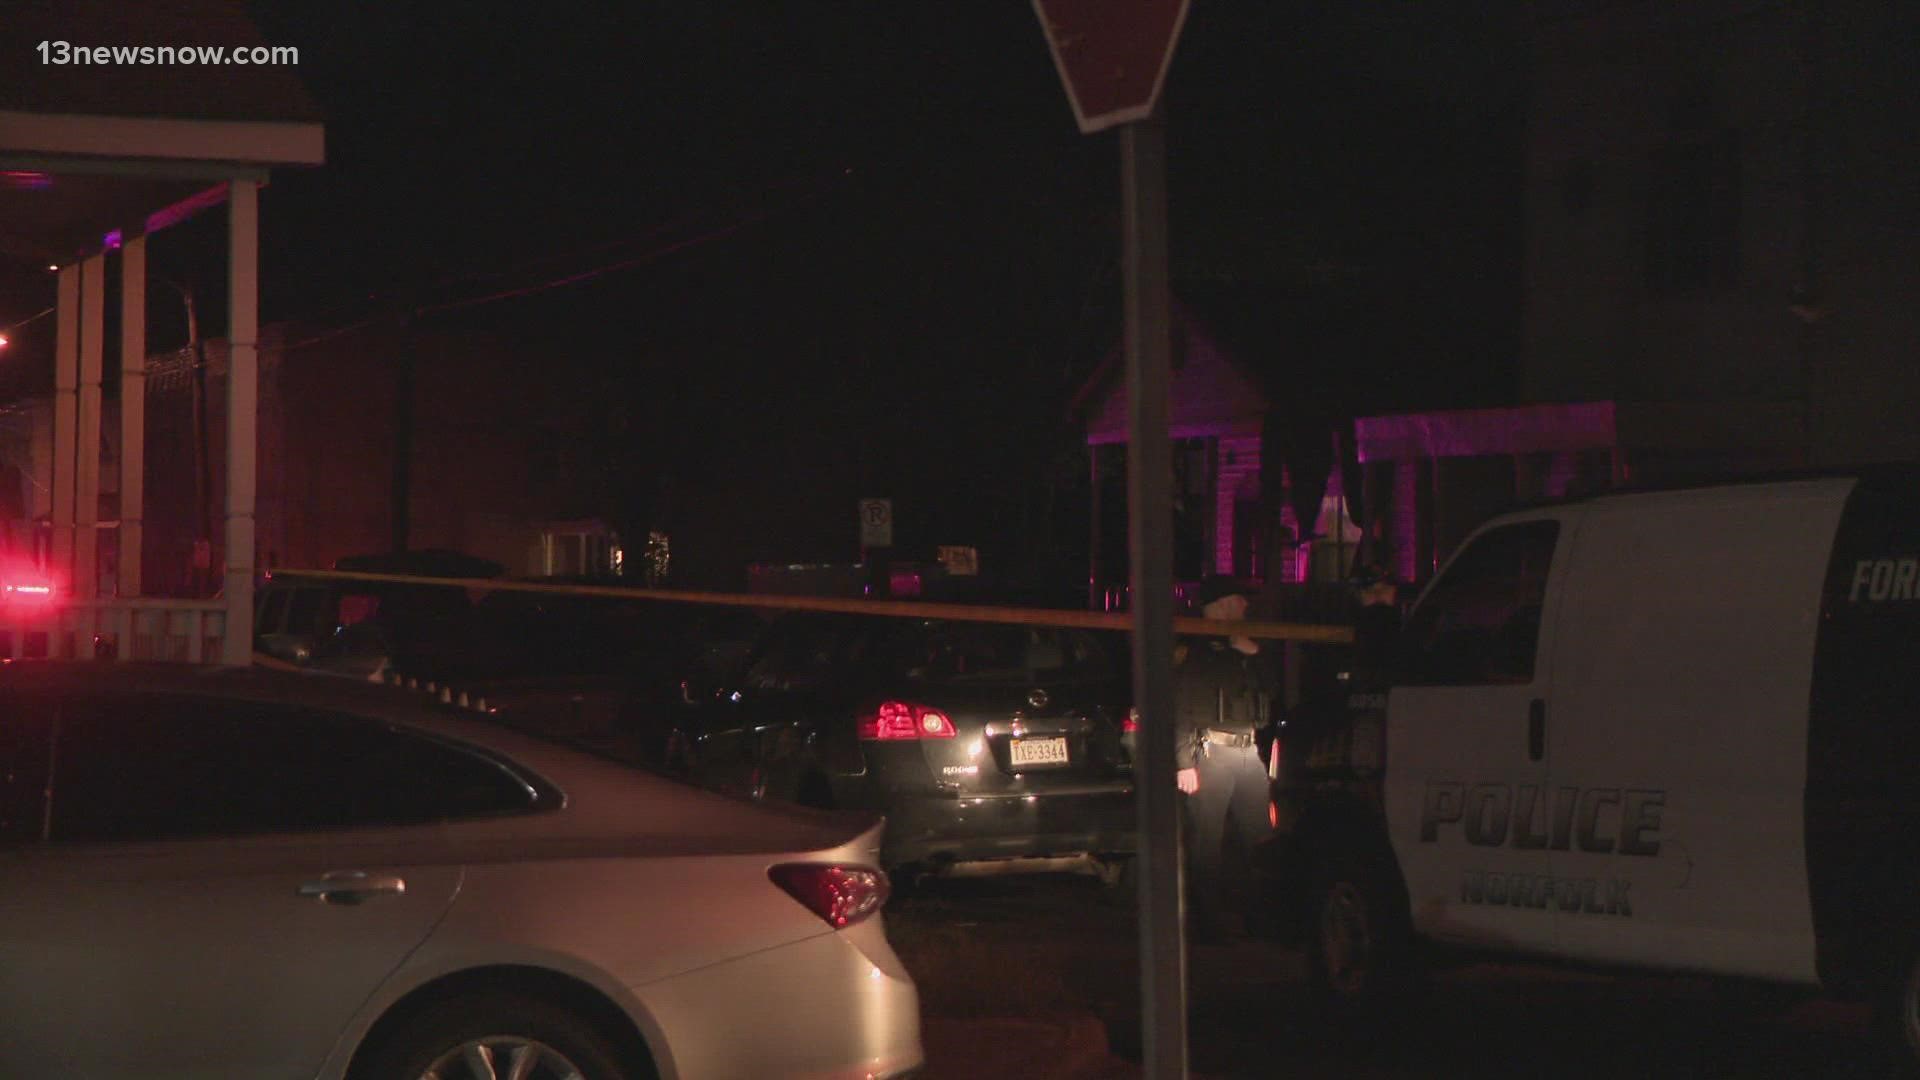 According to the Norfolk Police Dept., the shooting happened in the 800 block of B Avenue just after 6:30 p.m.